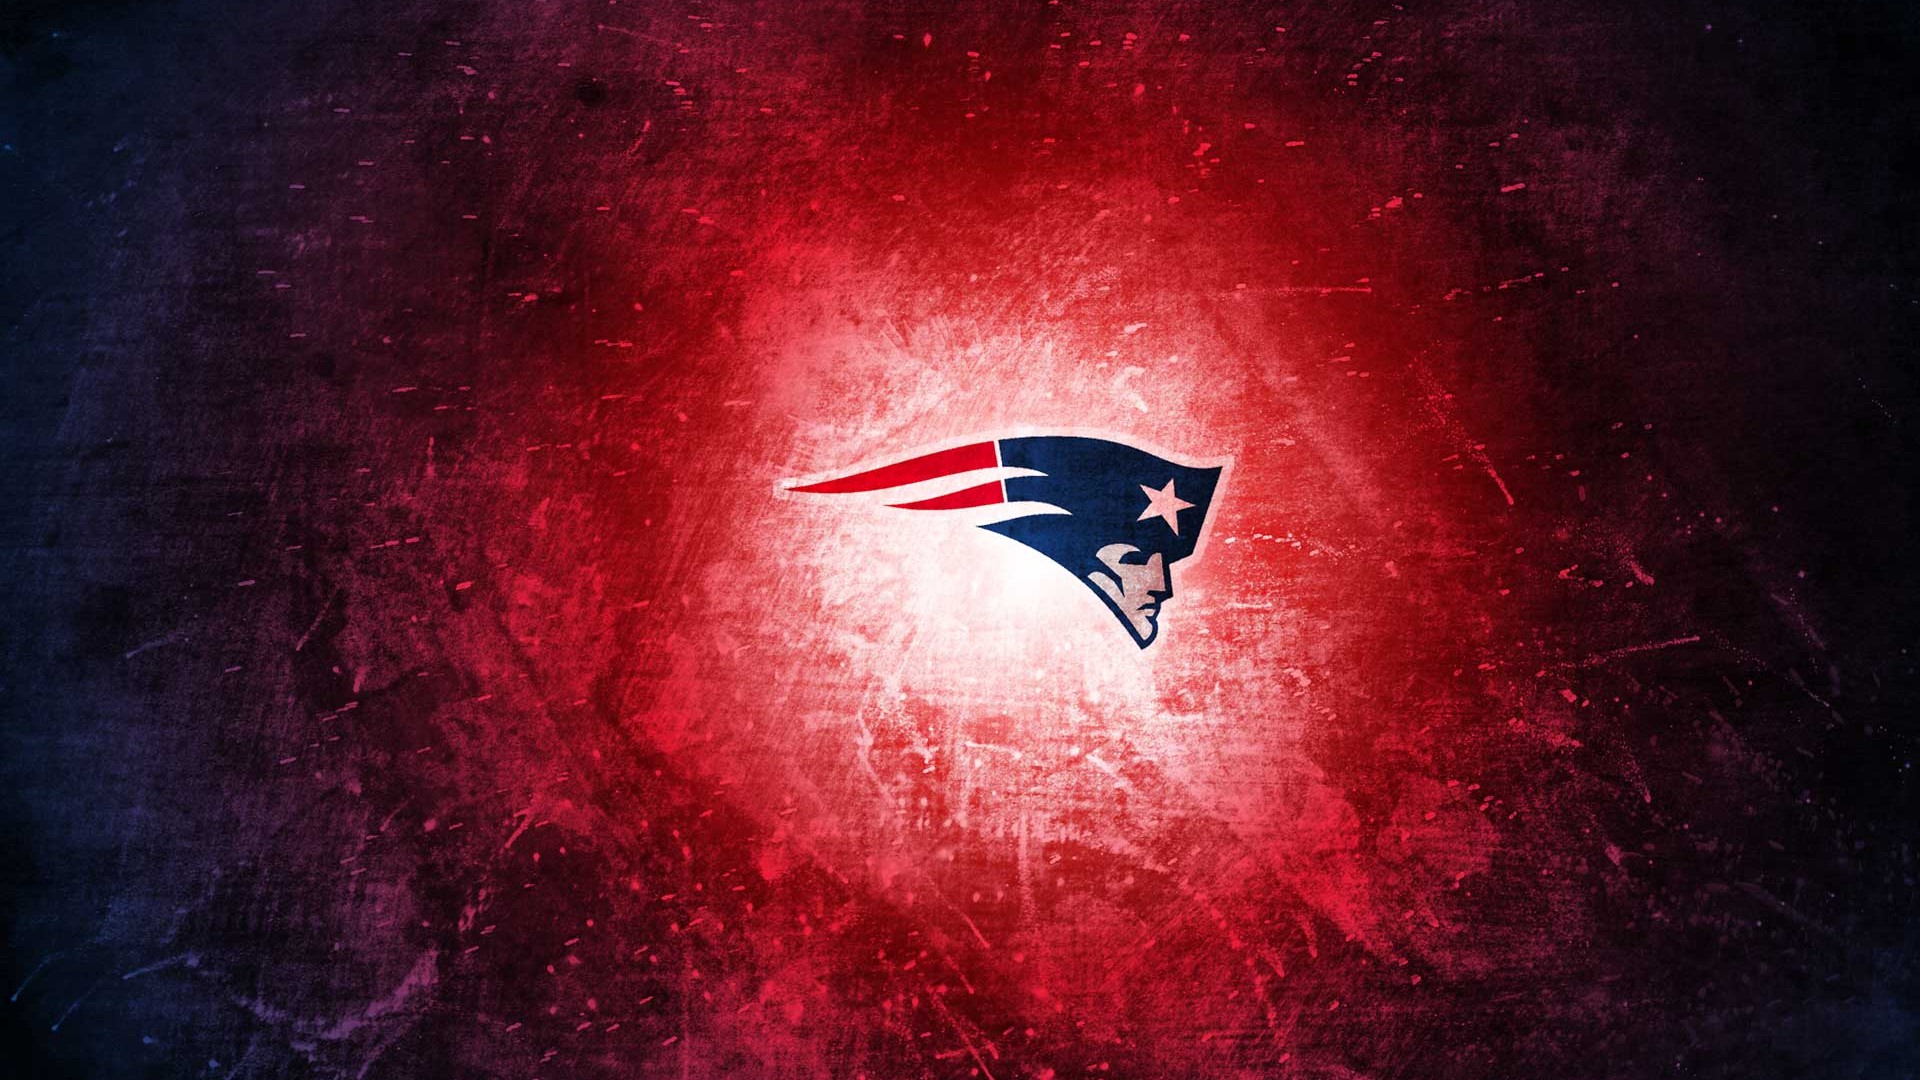 Patriots Wallpaper For Mac Backgrounds With Resolution 1920X1080 pixel. You can make this wallpaper for your Mac or Windows Desktop Background, iPhone, Android or Tablet and another Smartphone device for free